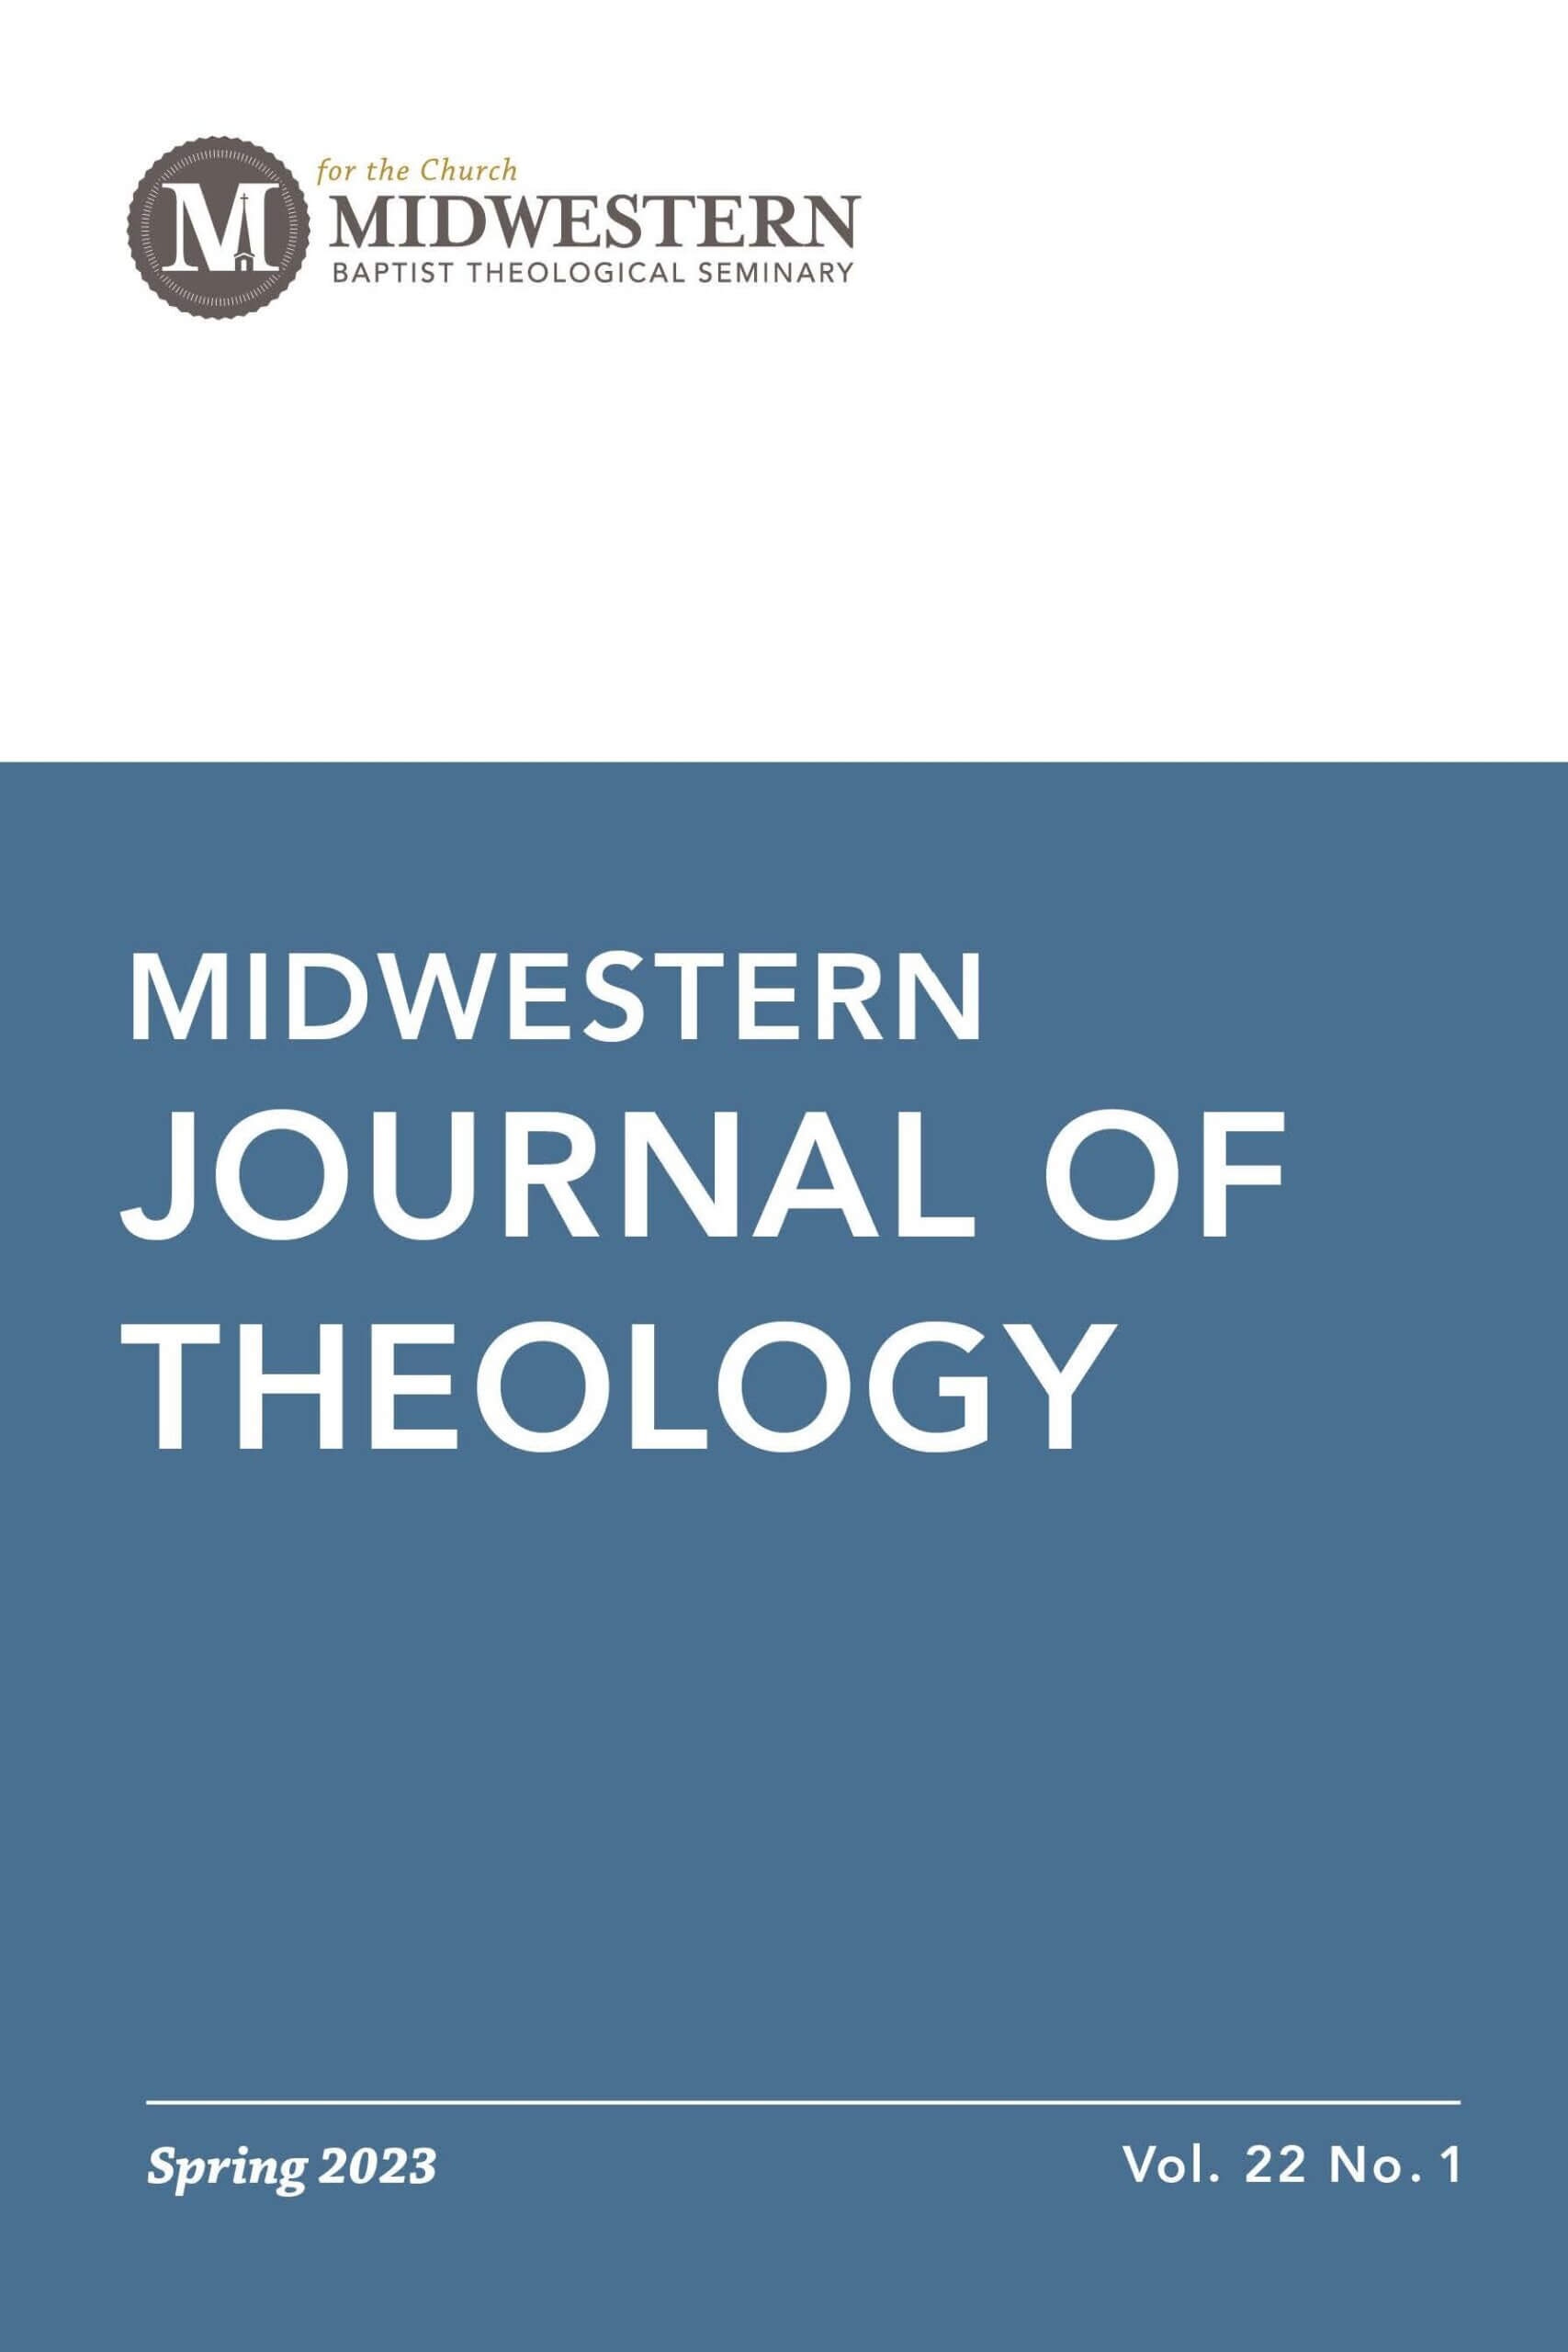 Fall 2022 Midwestern Journal of Theology